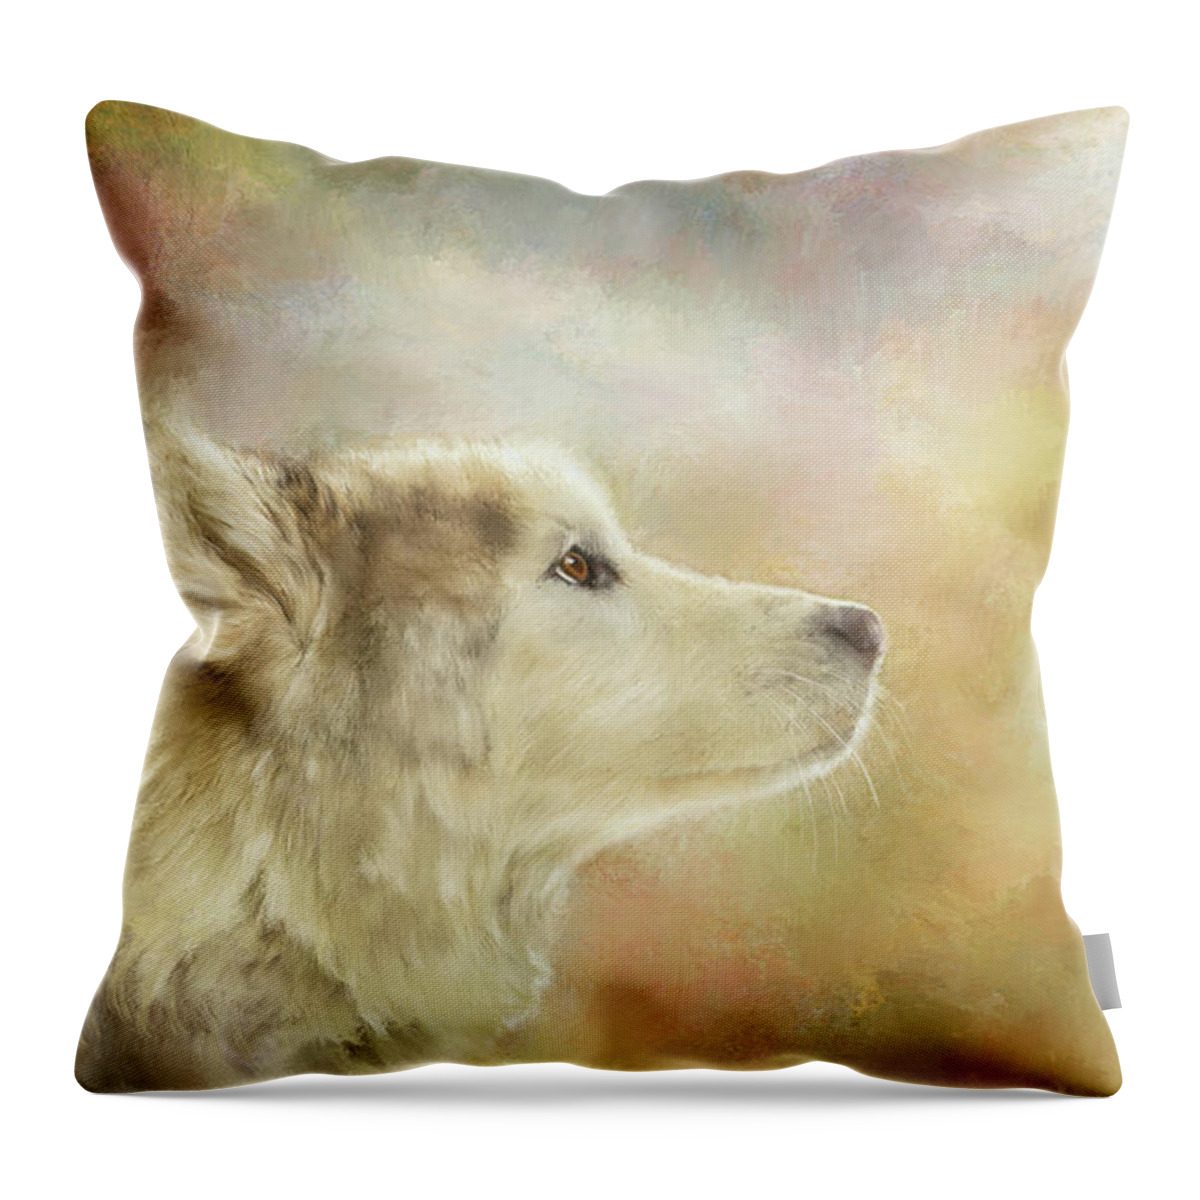 Malamute Throw Pillow featuring the mixed media Akira, the Alaskan Malamute by Colleen Taylor